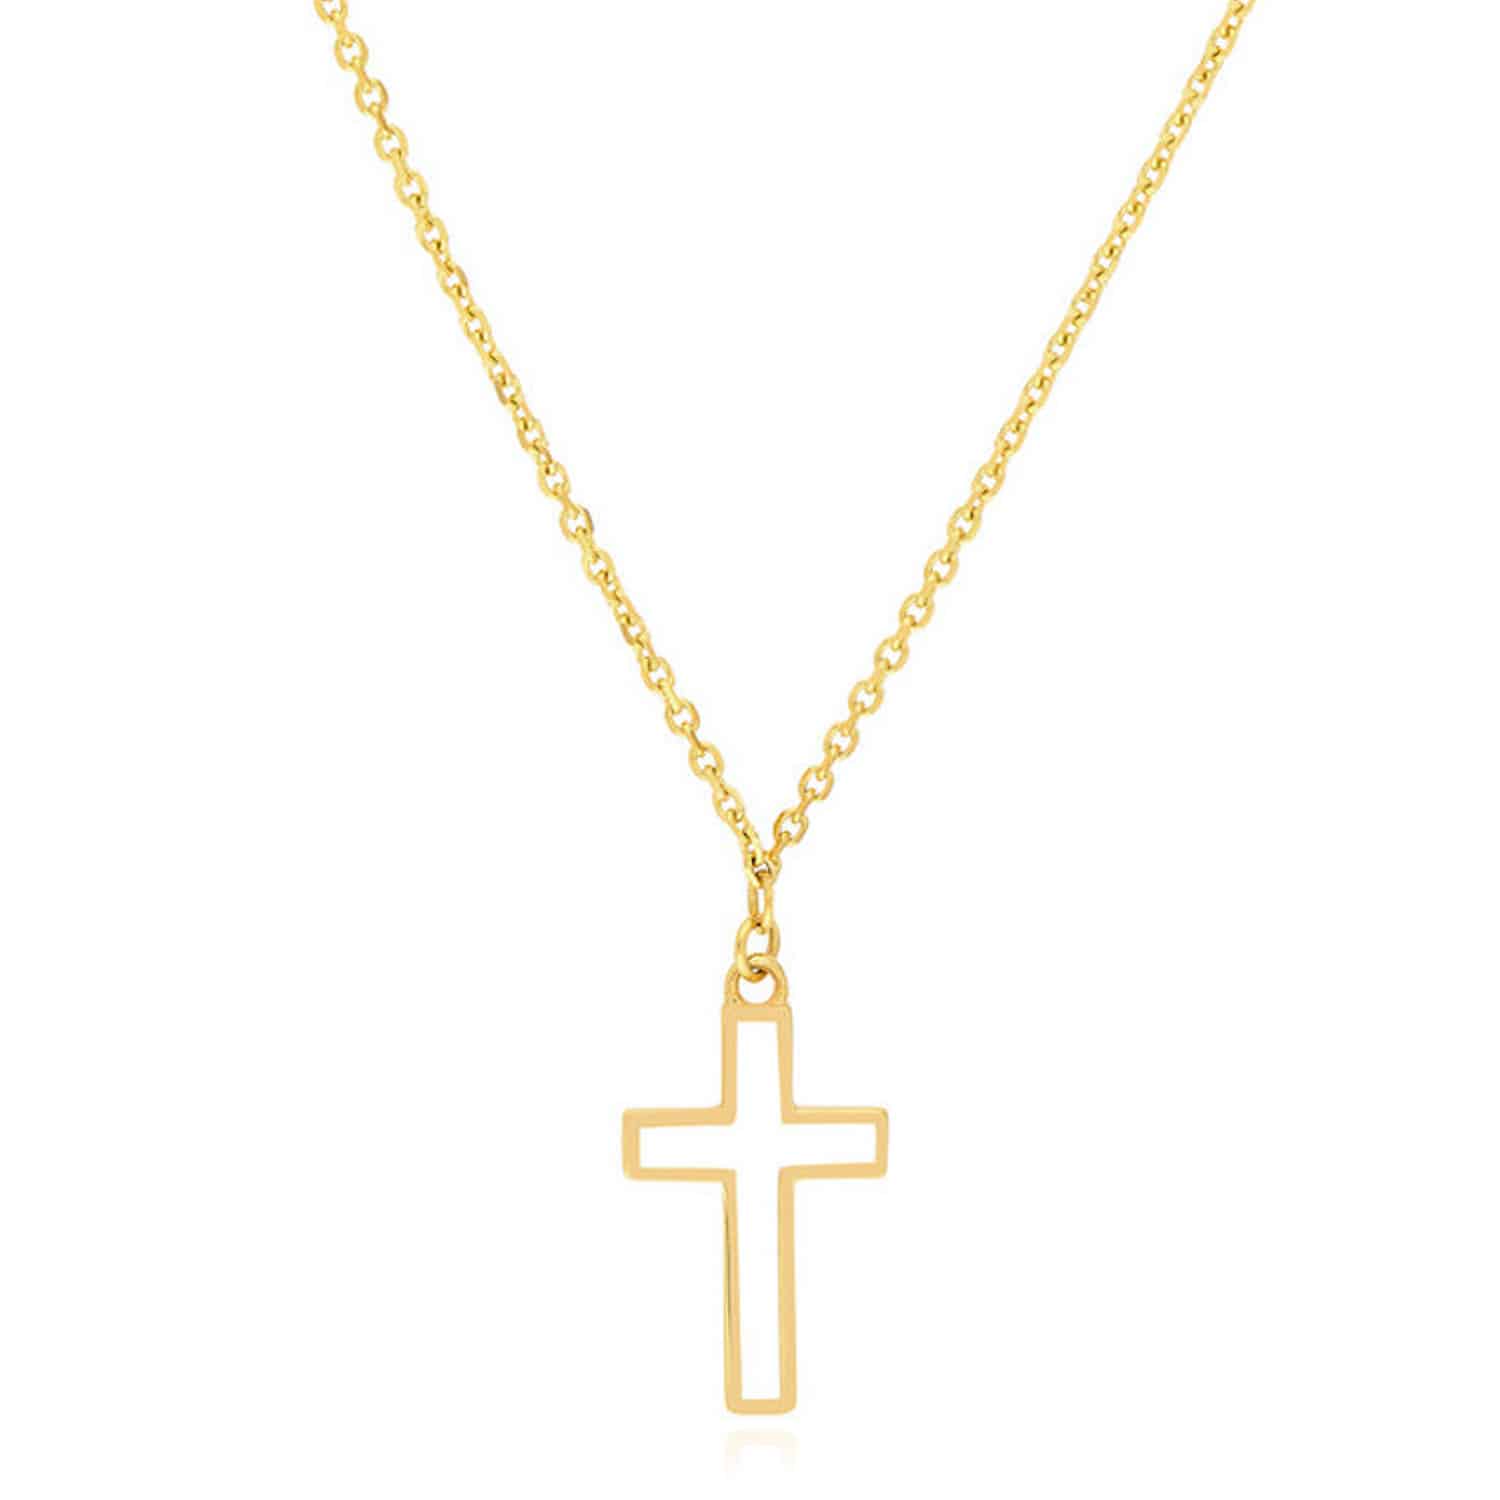 14K Yellow Gold Cable Turquoise Enamel Cross Pendant Necklace 16"-18" Adjustable - White